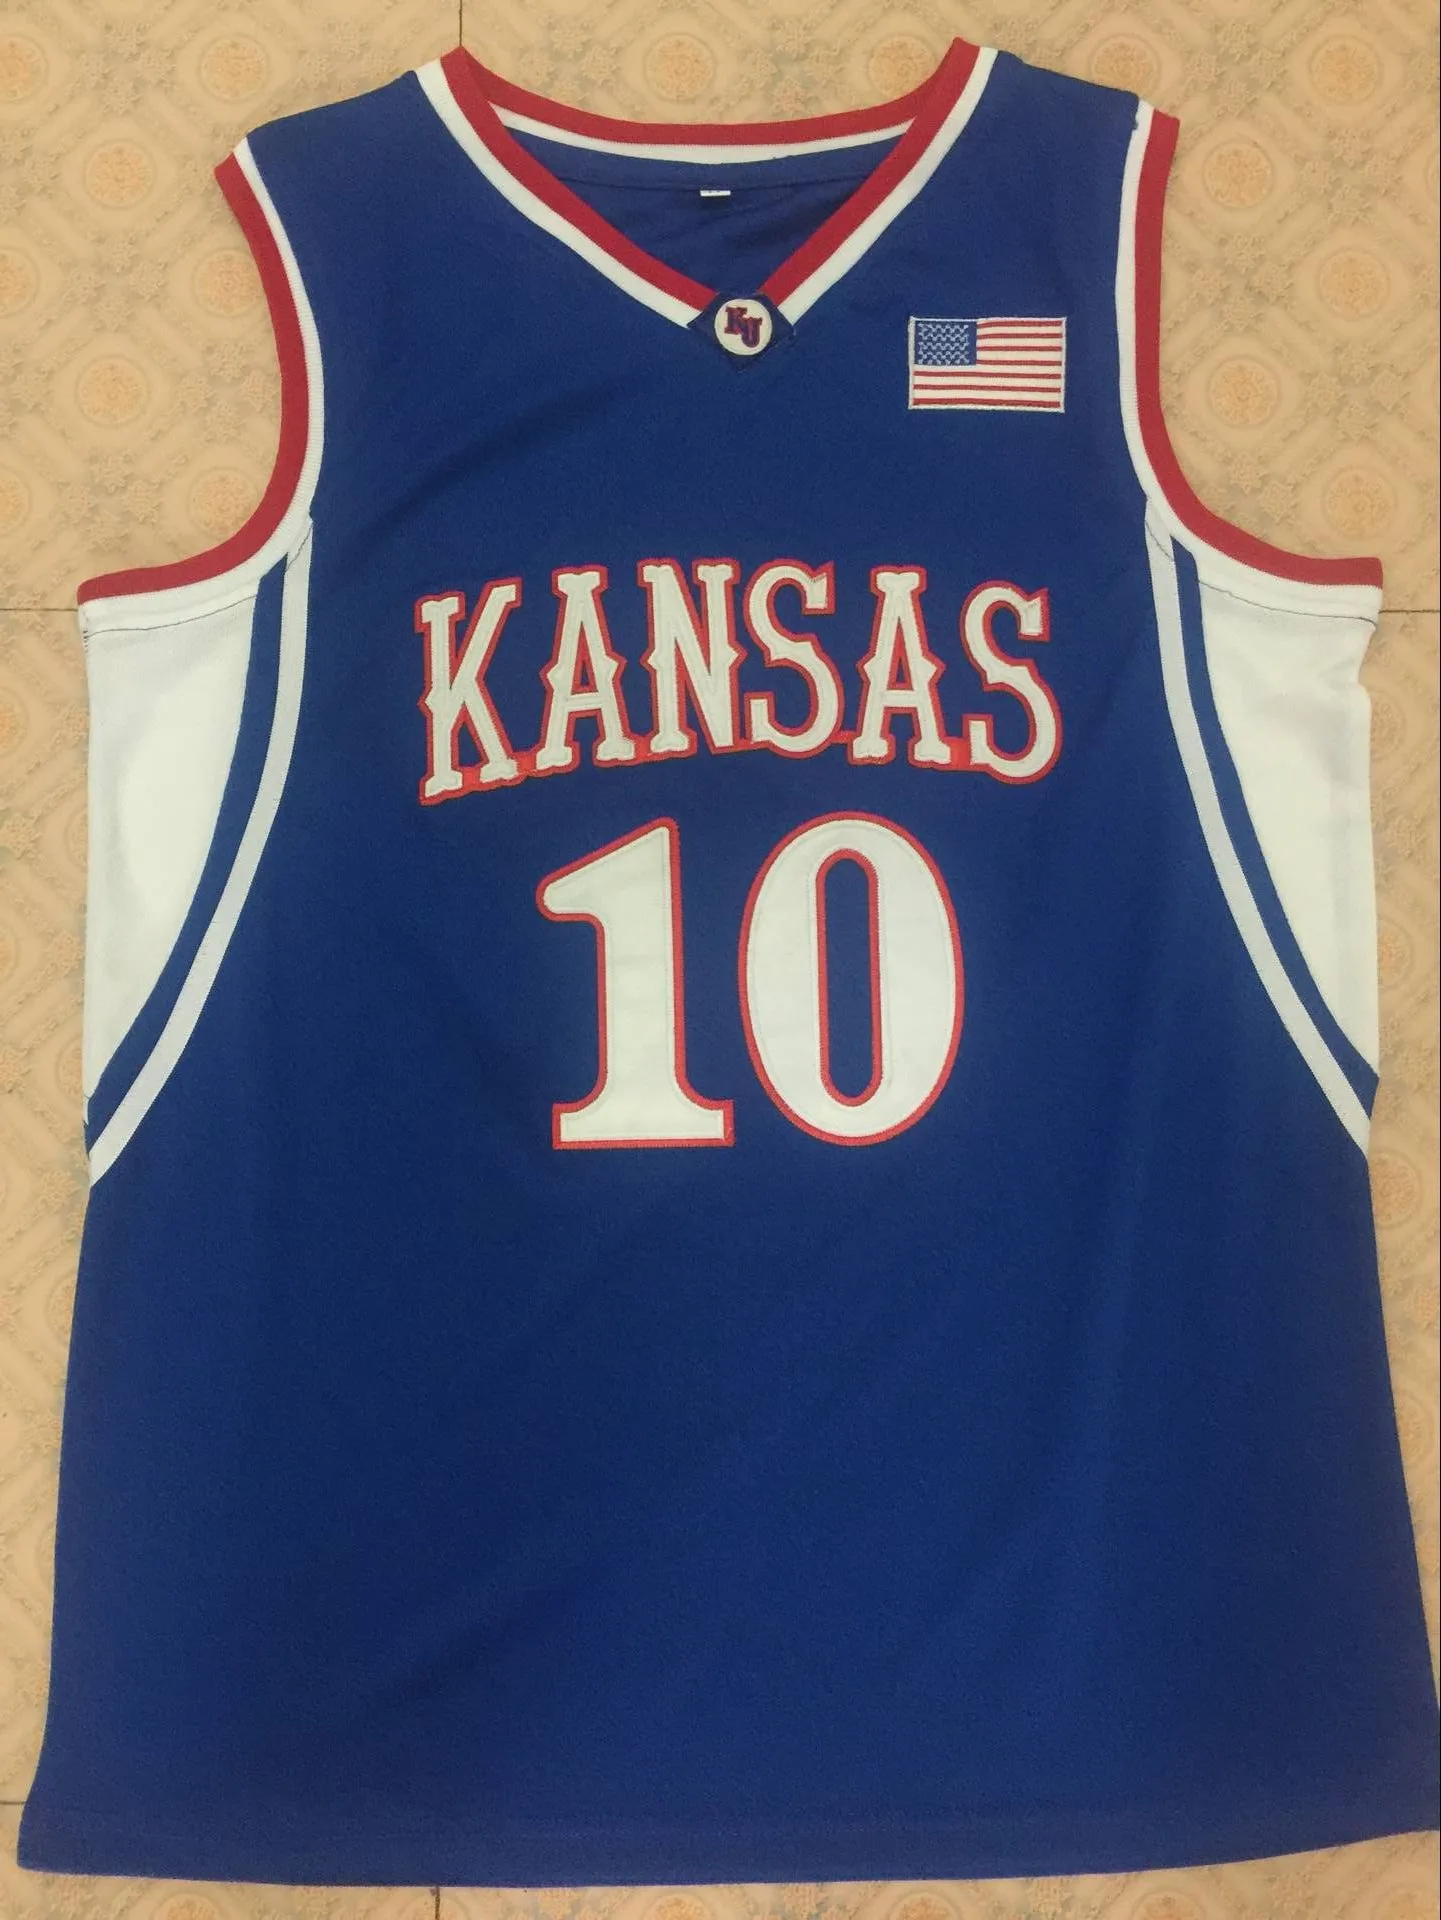 

03-04 #10 KIRK HINRICH Kansas Jayhawks Topps Mark Of Excellence Auto Throwback Basketball Jersey Uniforms Stitched Shirts